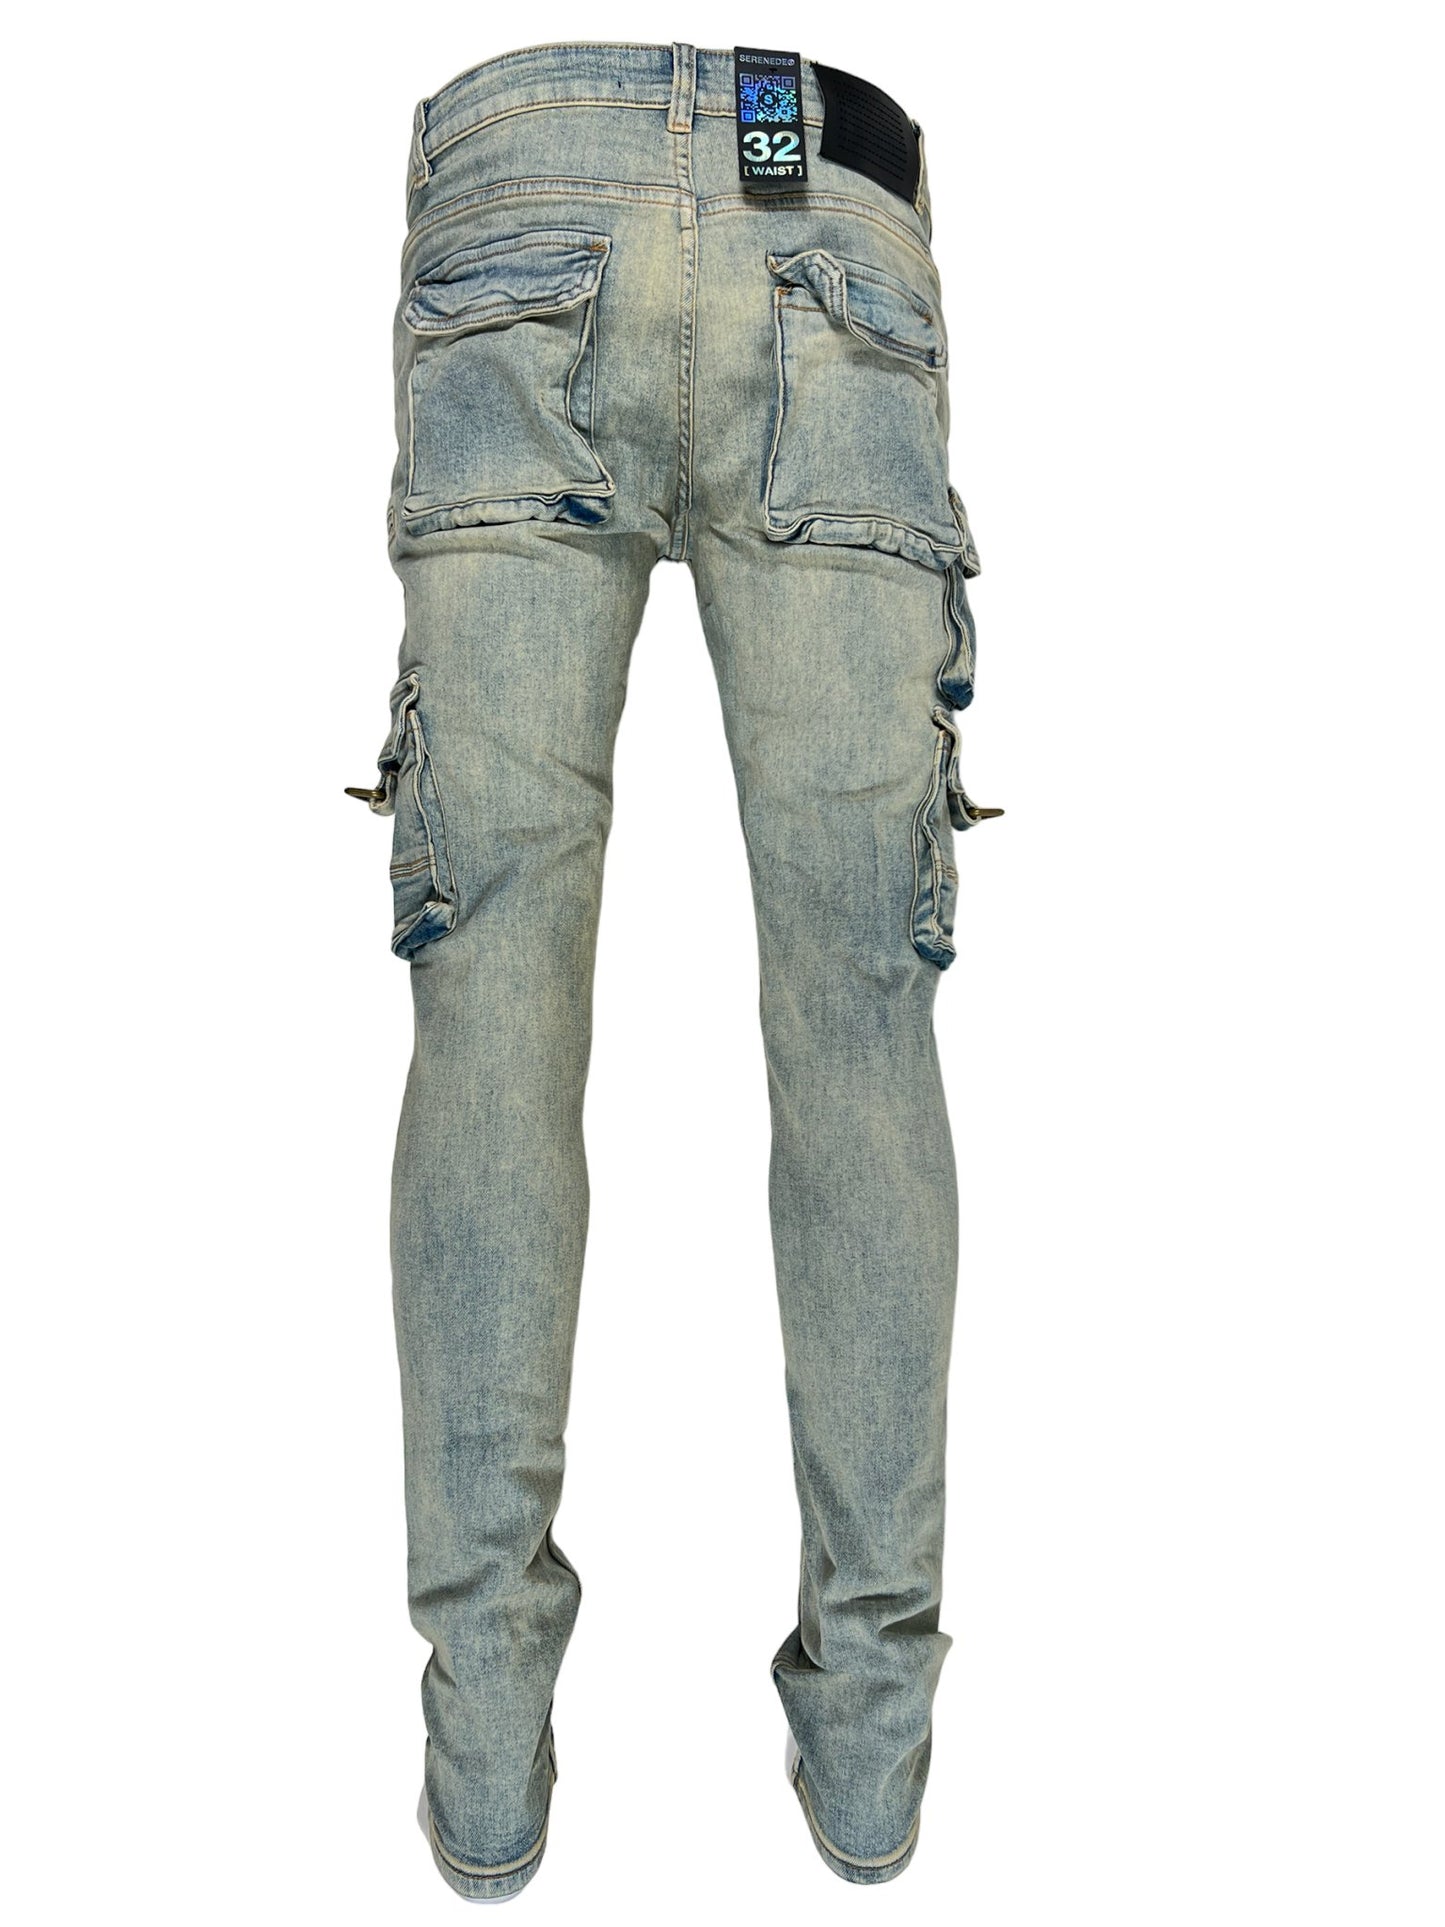 SERENEDE NEW EARTH 2.0 CARGO JEANS - Probus